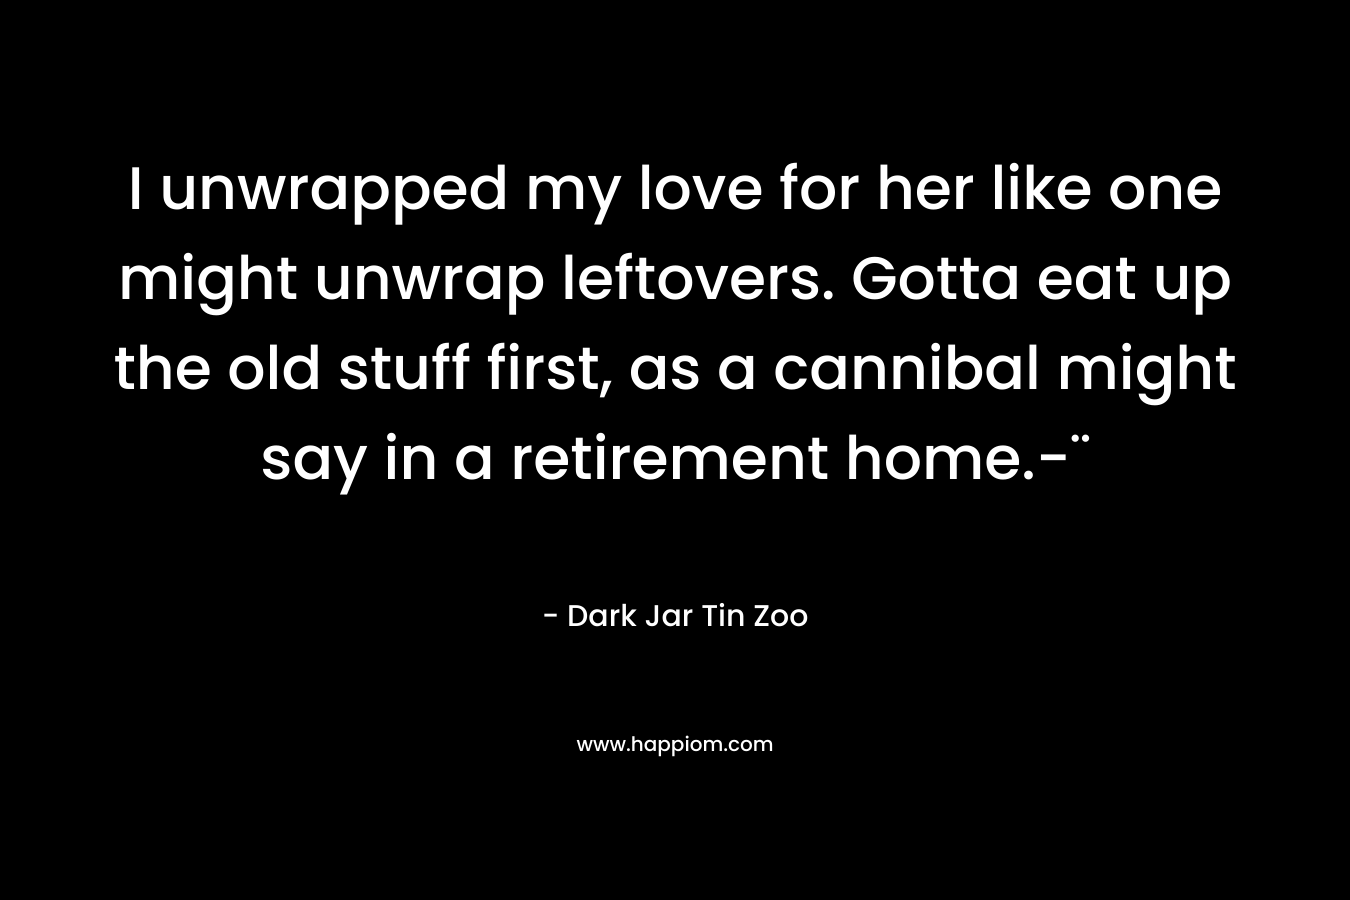 I unwrapped my love for her like one might unwrap leftovers. Gotta eat up the old stuff first, as a cannibal might say in a retirement home.-¨